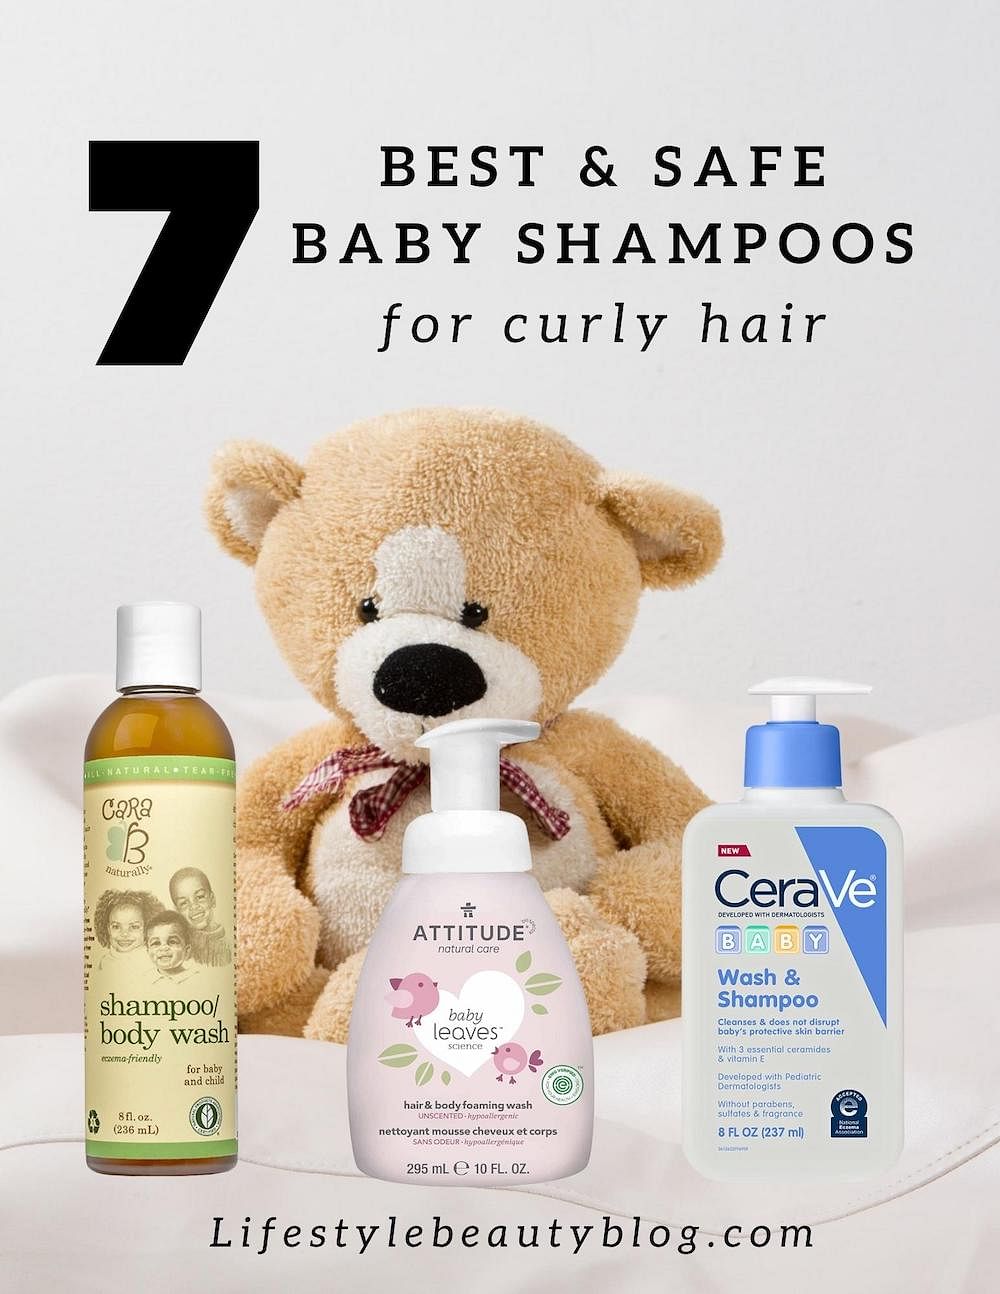 The 7 Safe and Best Baby Shampoos for Curly Hair Kids